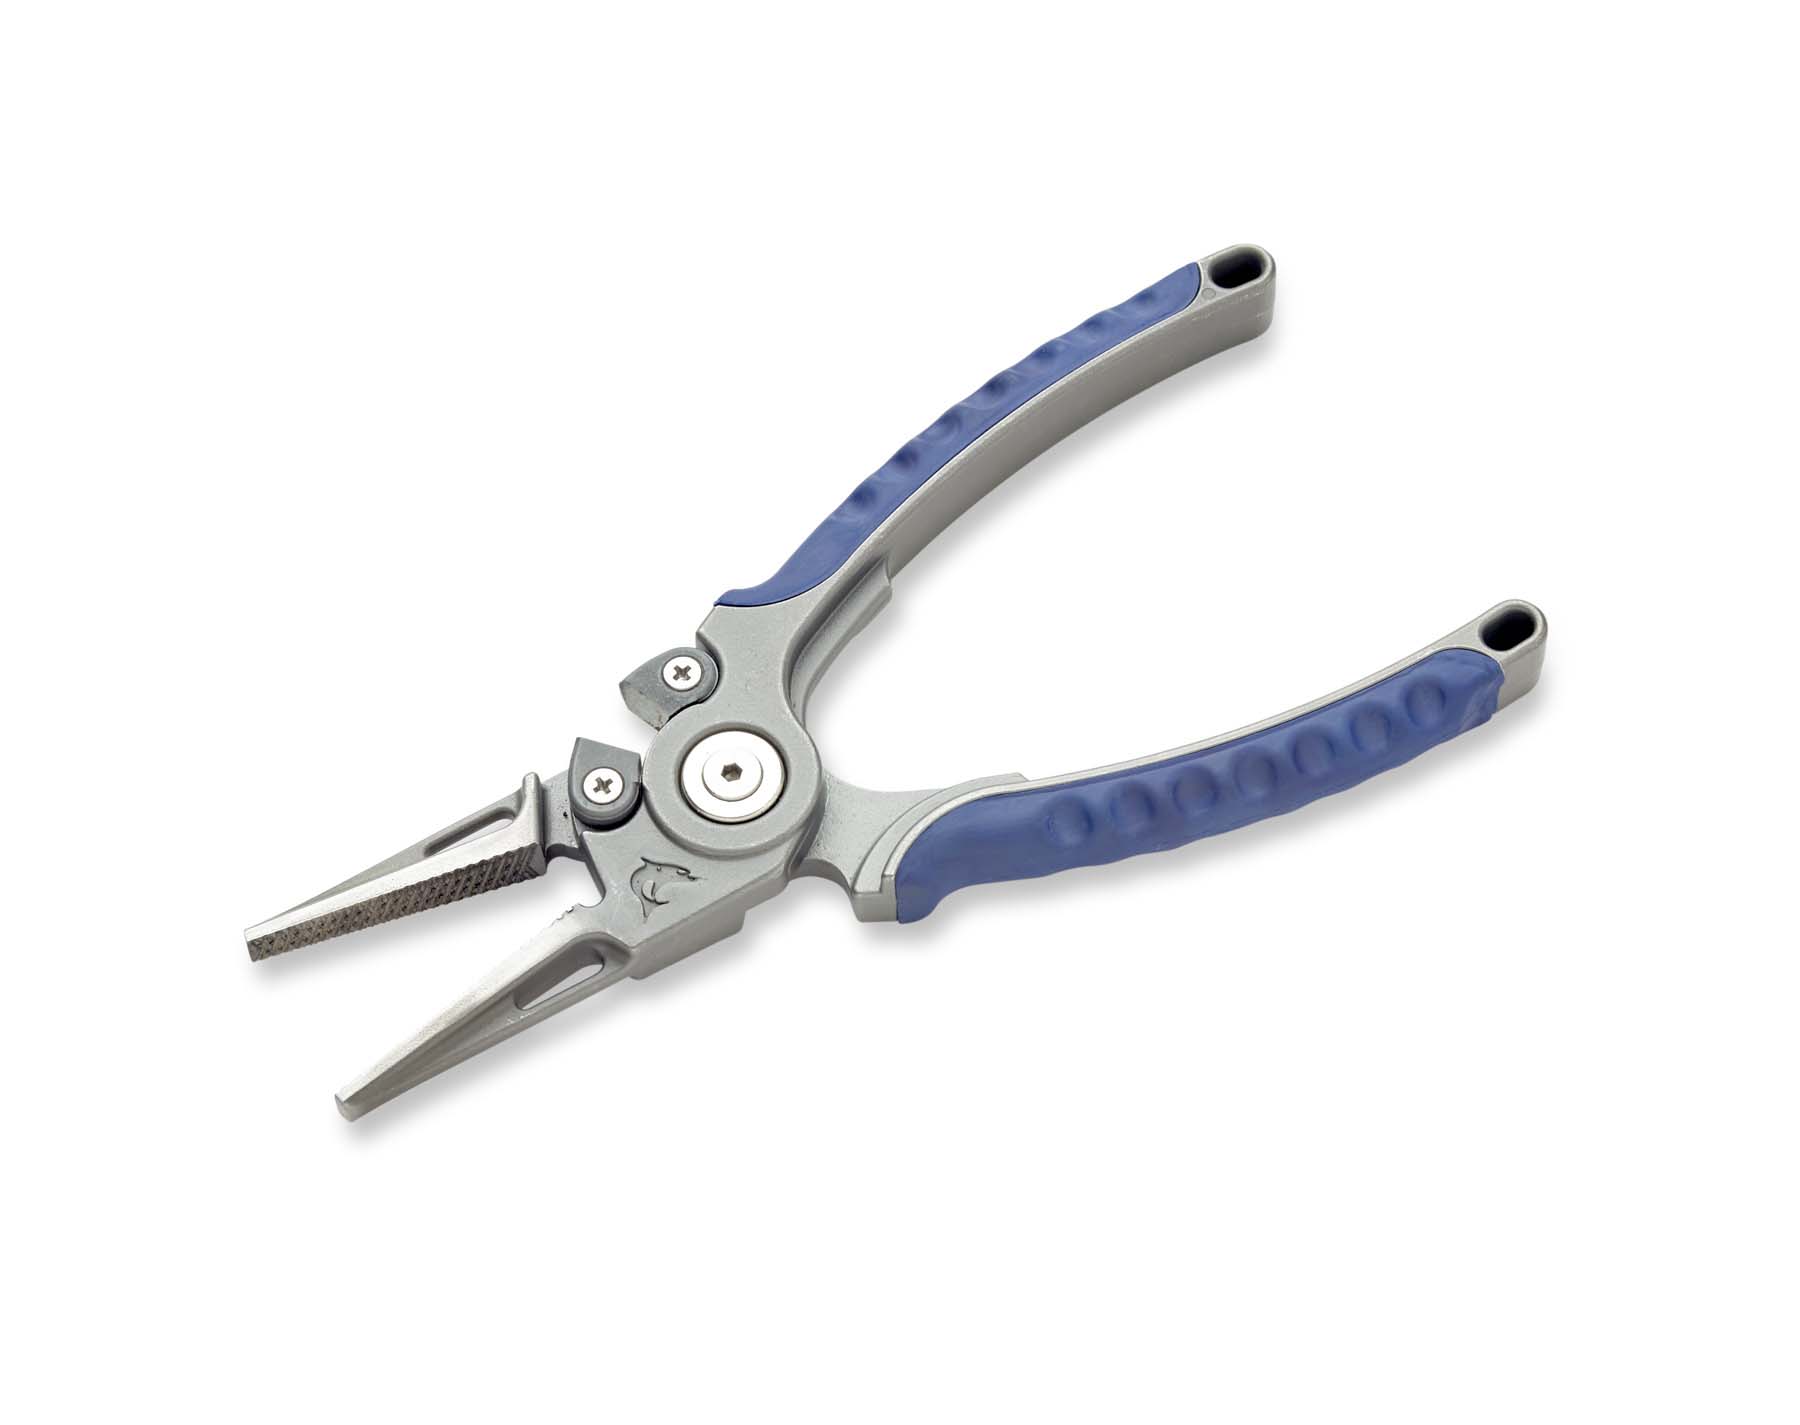 ICAST 2021 - $699 MOST EXPENSIVE FISHING PLIERS